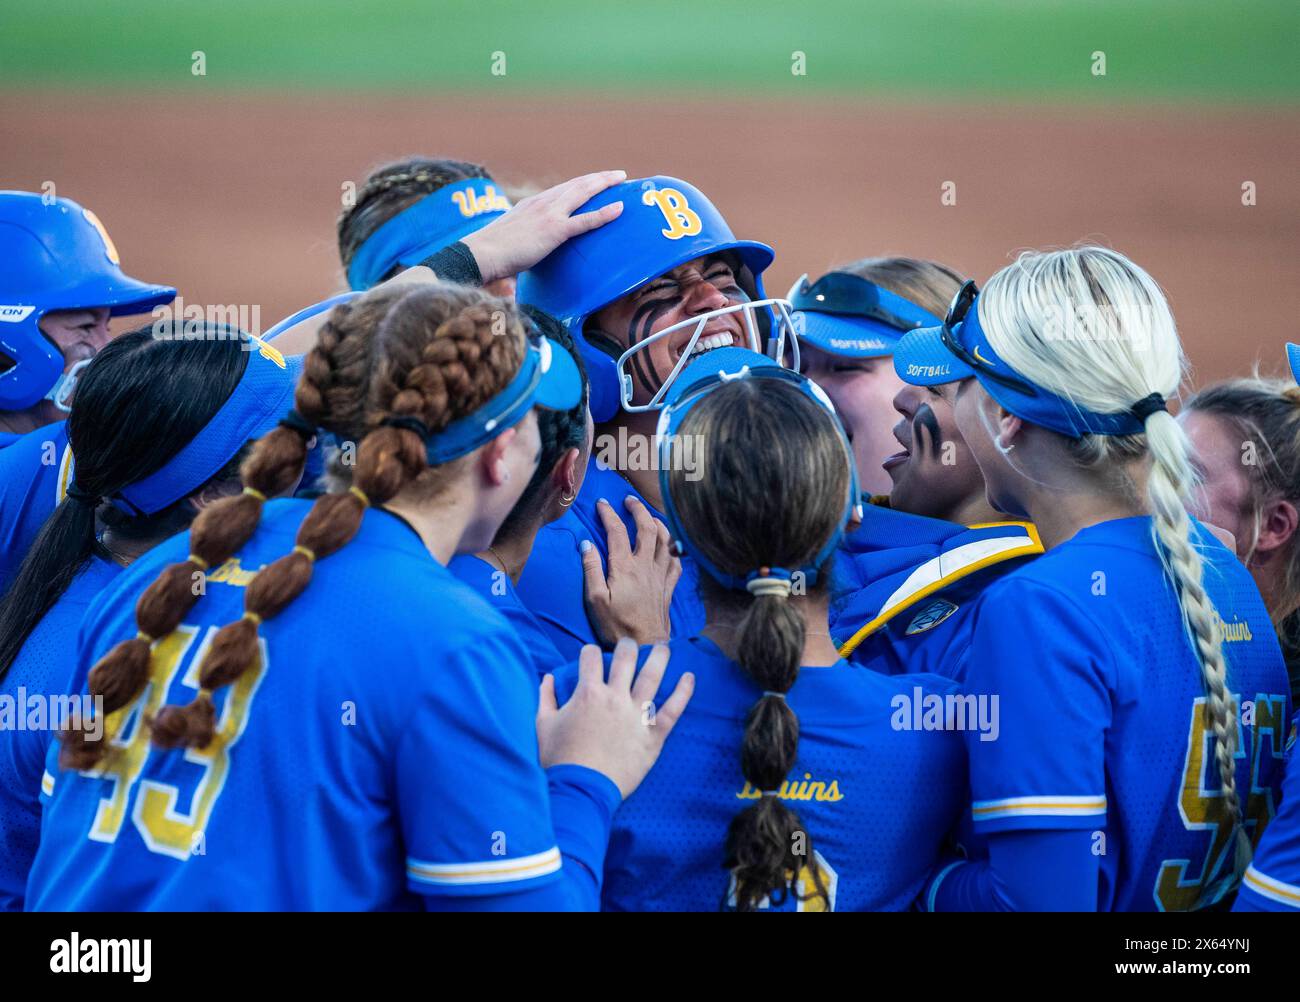 May 11 2024 Palo Alto CA U.S.A. UCLA infielder Jordan Woolery (15)hits a solo home run in the bottom of the second inning, celebrates with her team at home plate during the NCAA Pac 12 Softball Tournament Championship between UCLA Bruins and the Utah Utes. UCLA beat Utah 2-1 at Boyd & Jill Smith Family Stadium Palo Alto Calif. Thurman James/CSM (Credit Image: © Thurman James/Cal Sport Media) Stock Photo